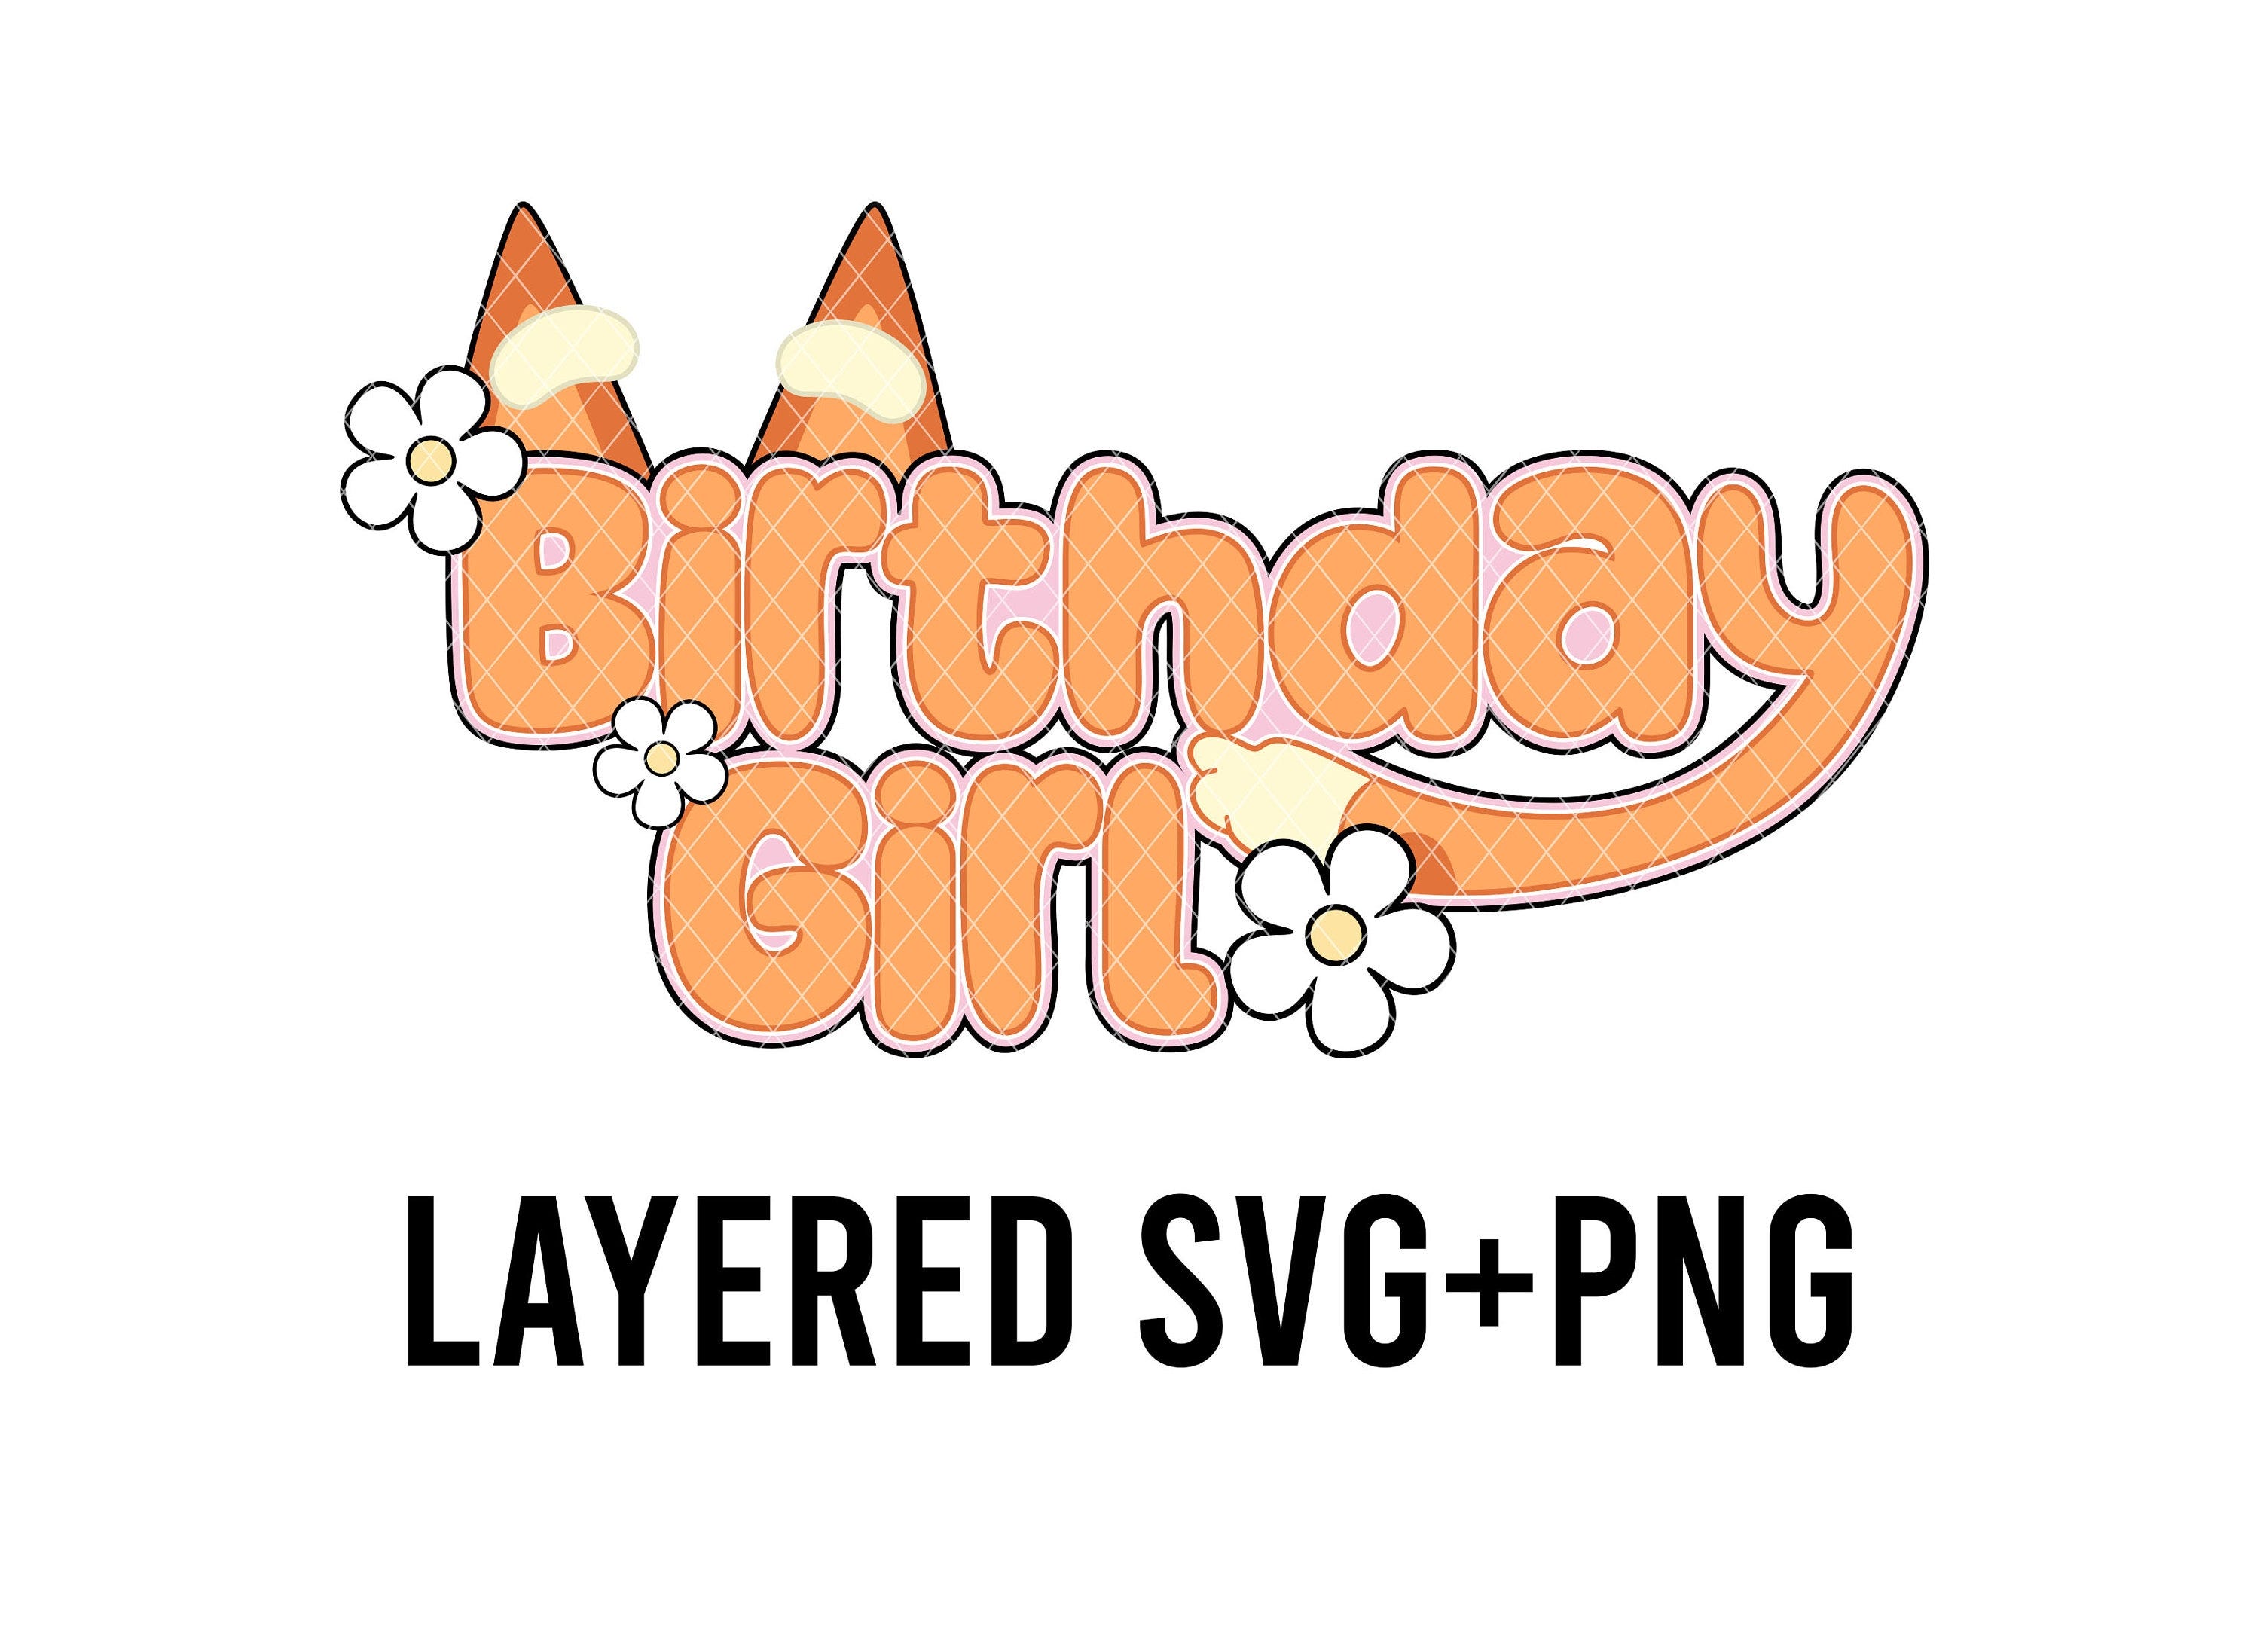 Bingo Birthday Girl Layered By Colour SVG + PNG